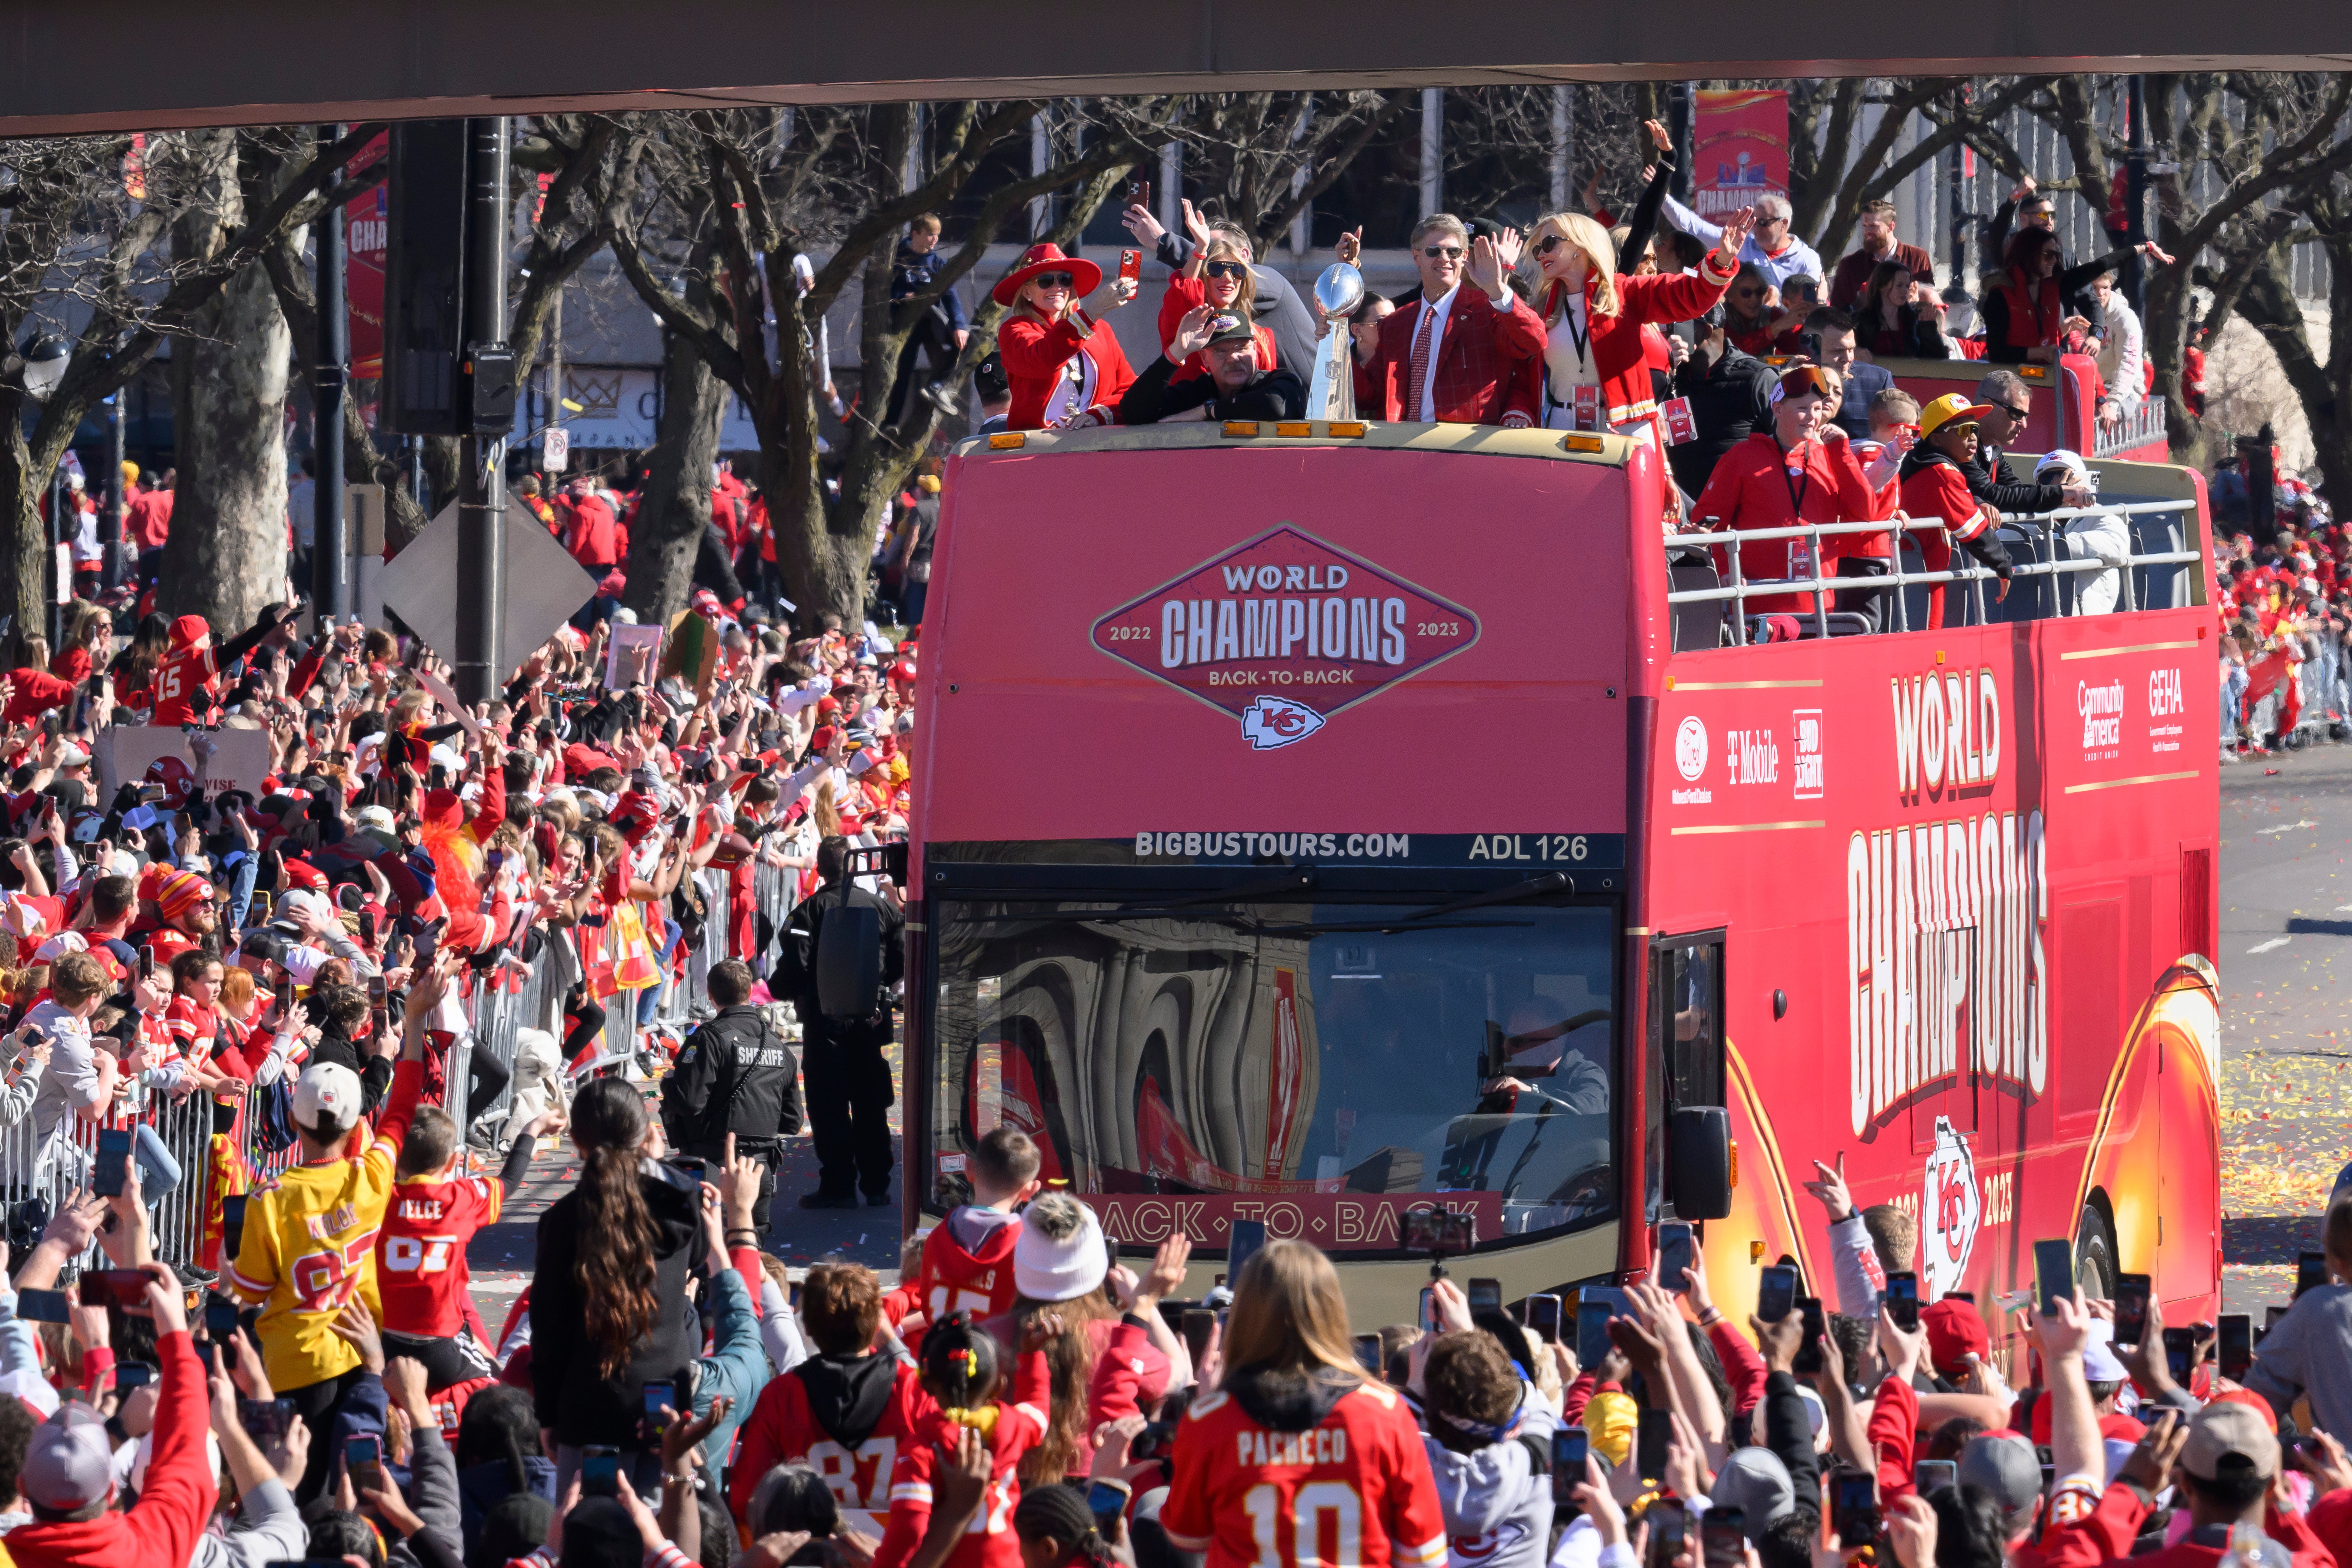 The shooting occurred last week during the Kansas City Chiefs Super Bowl victory parade